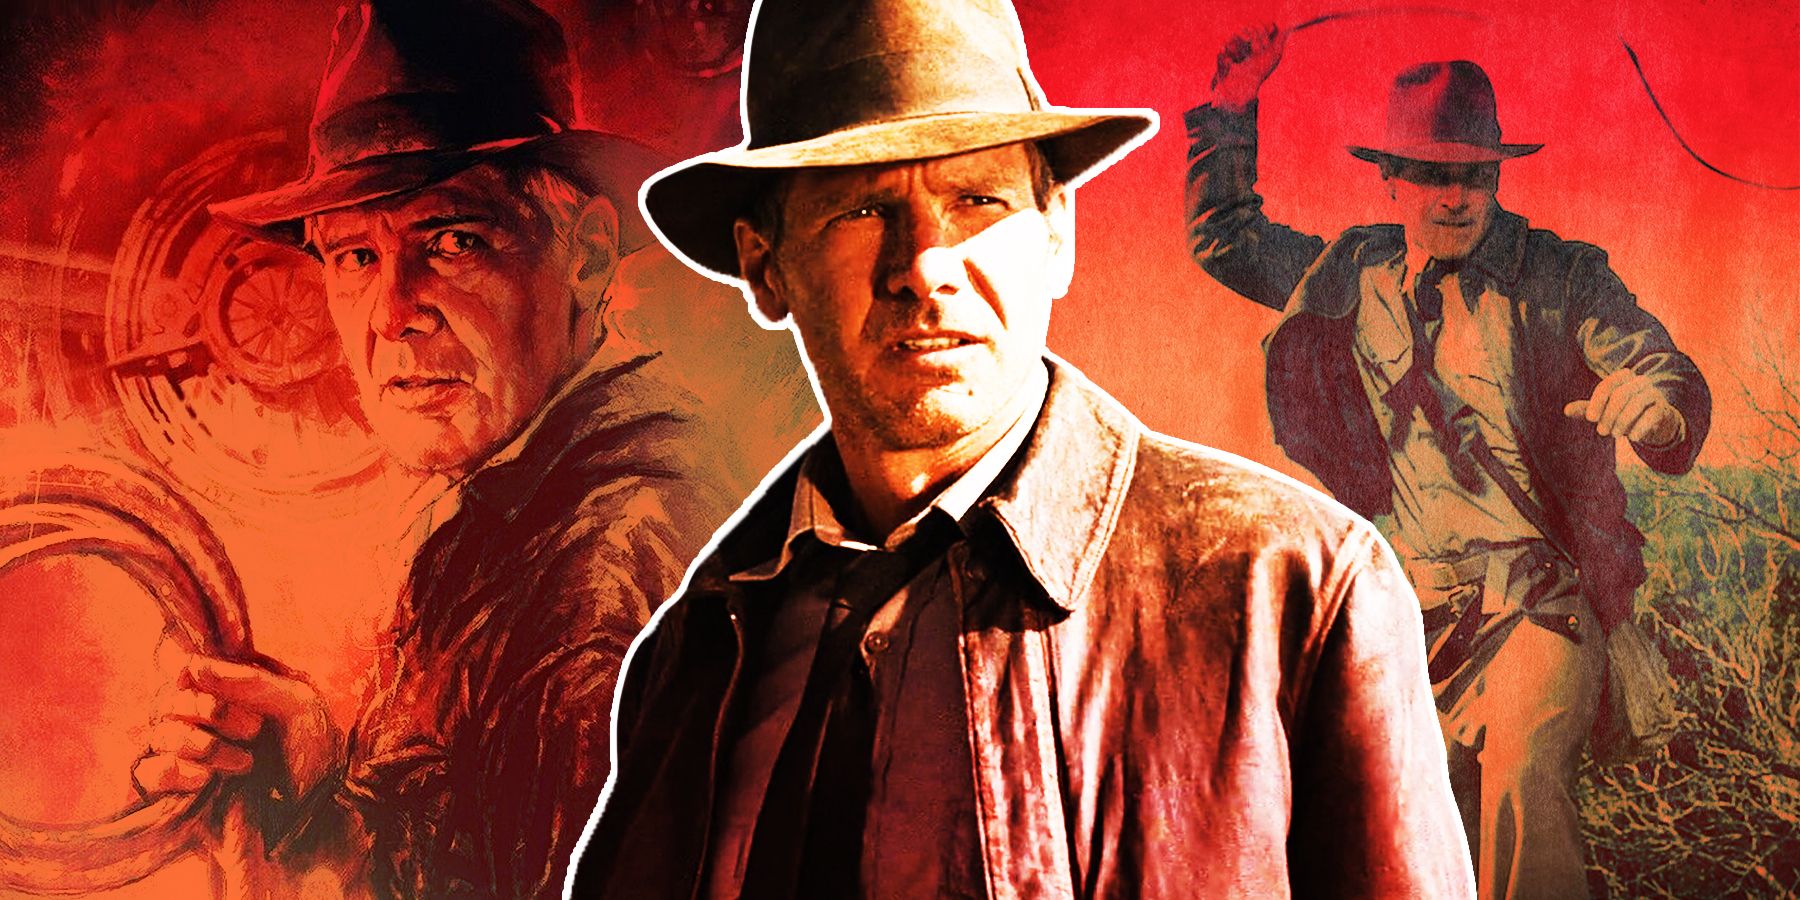 A composite image features Harrison Ford as Indiana Jones through the years